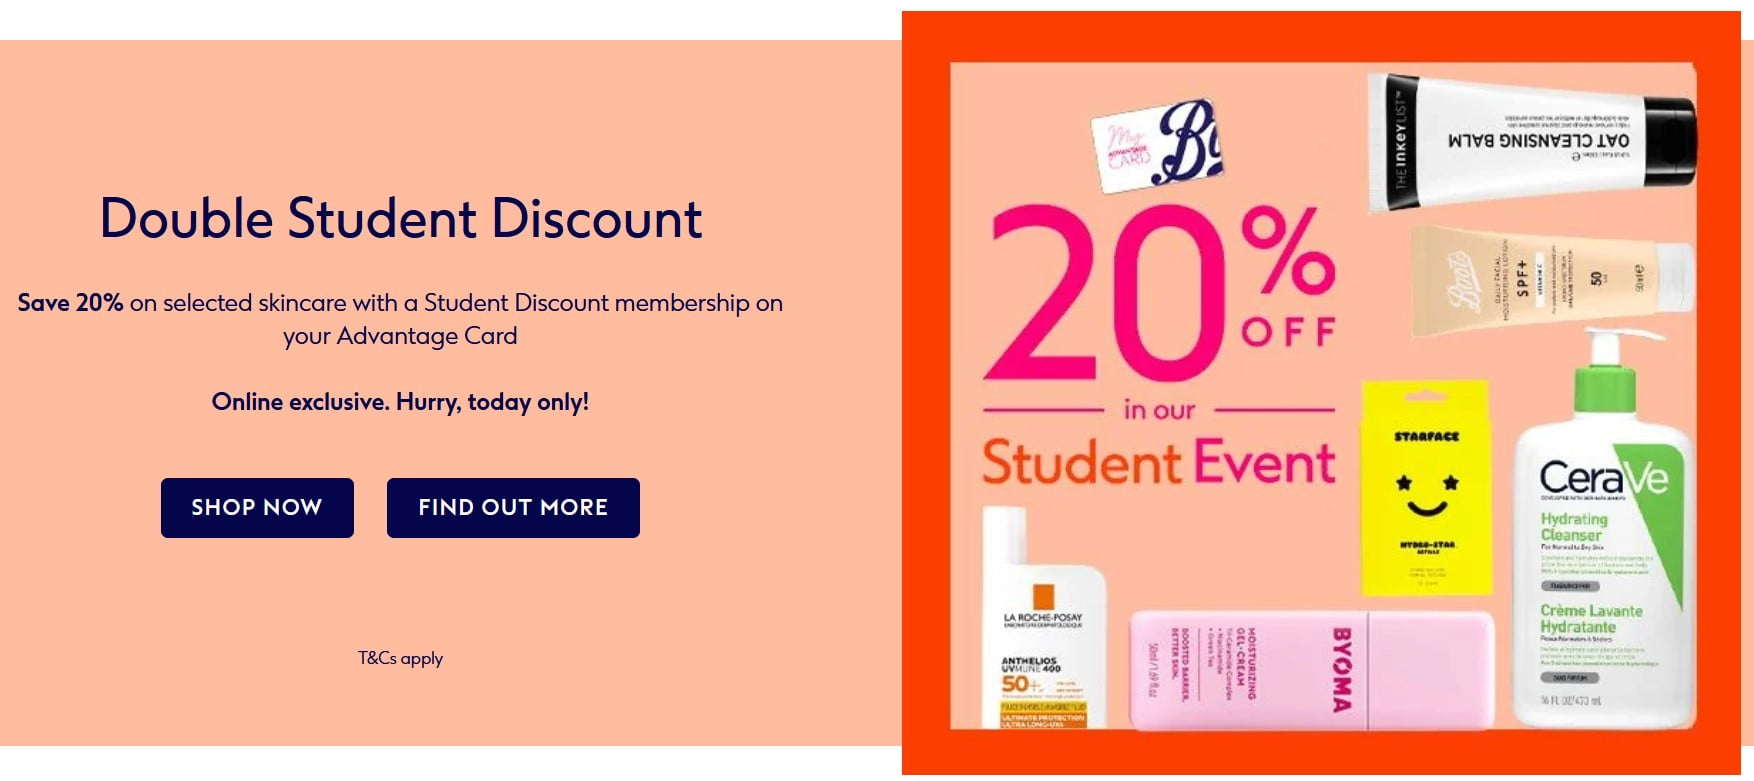 Save 20% on selected skincare with a valid student membership card at Boots